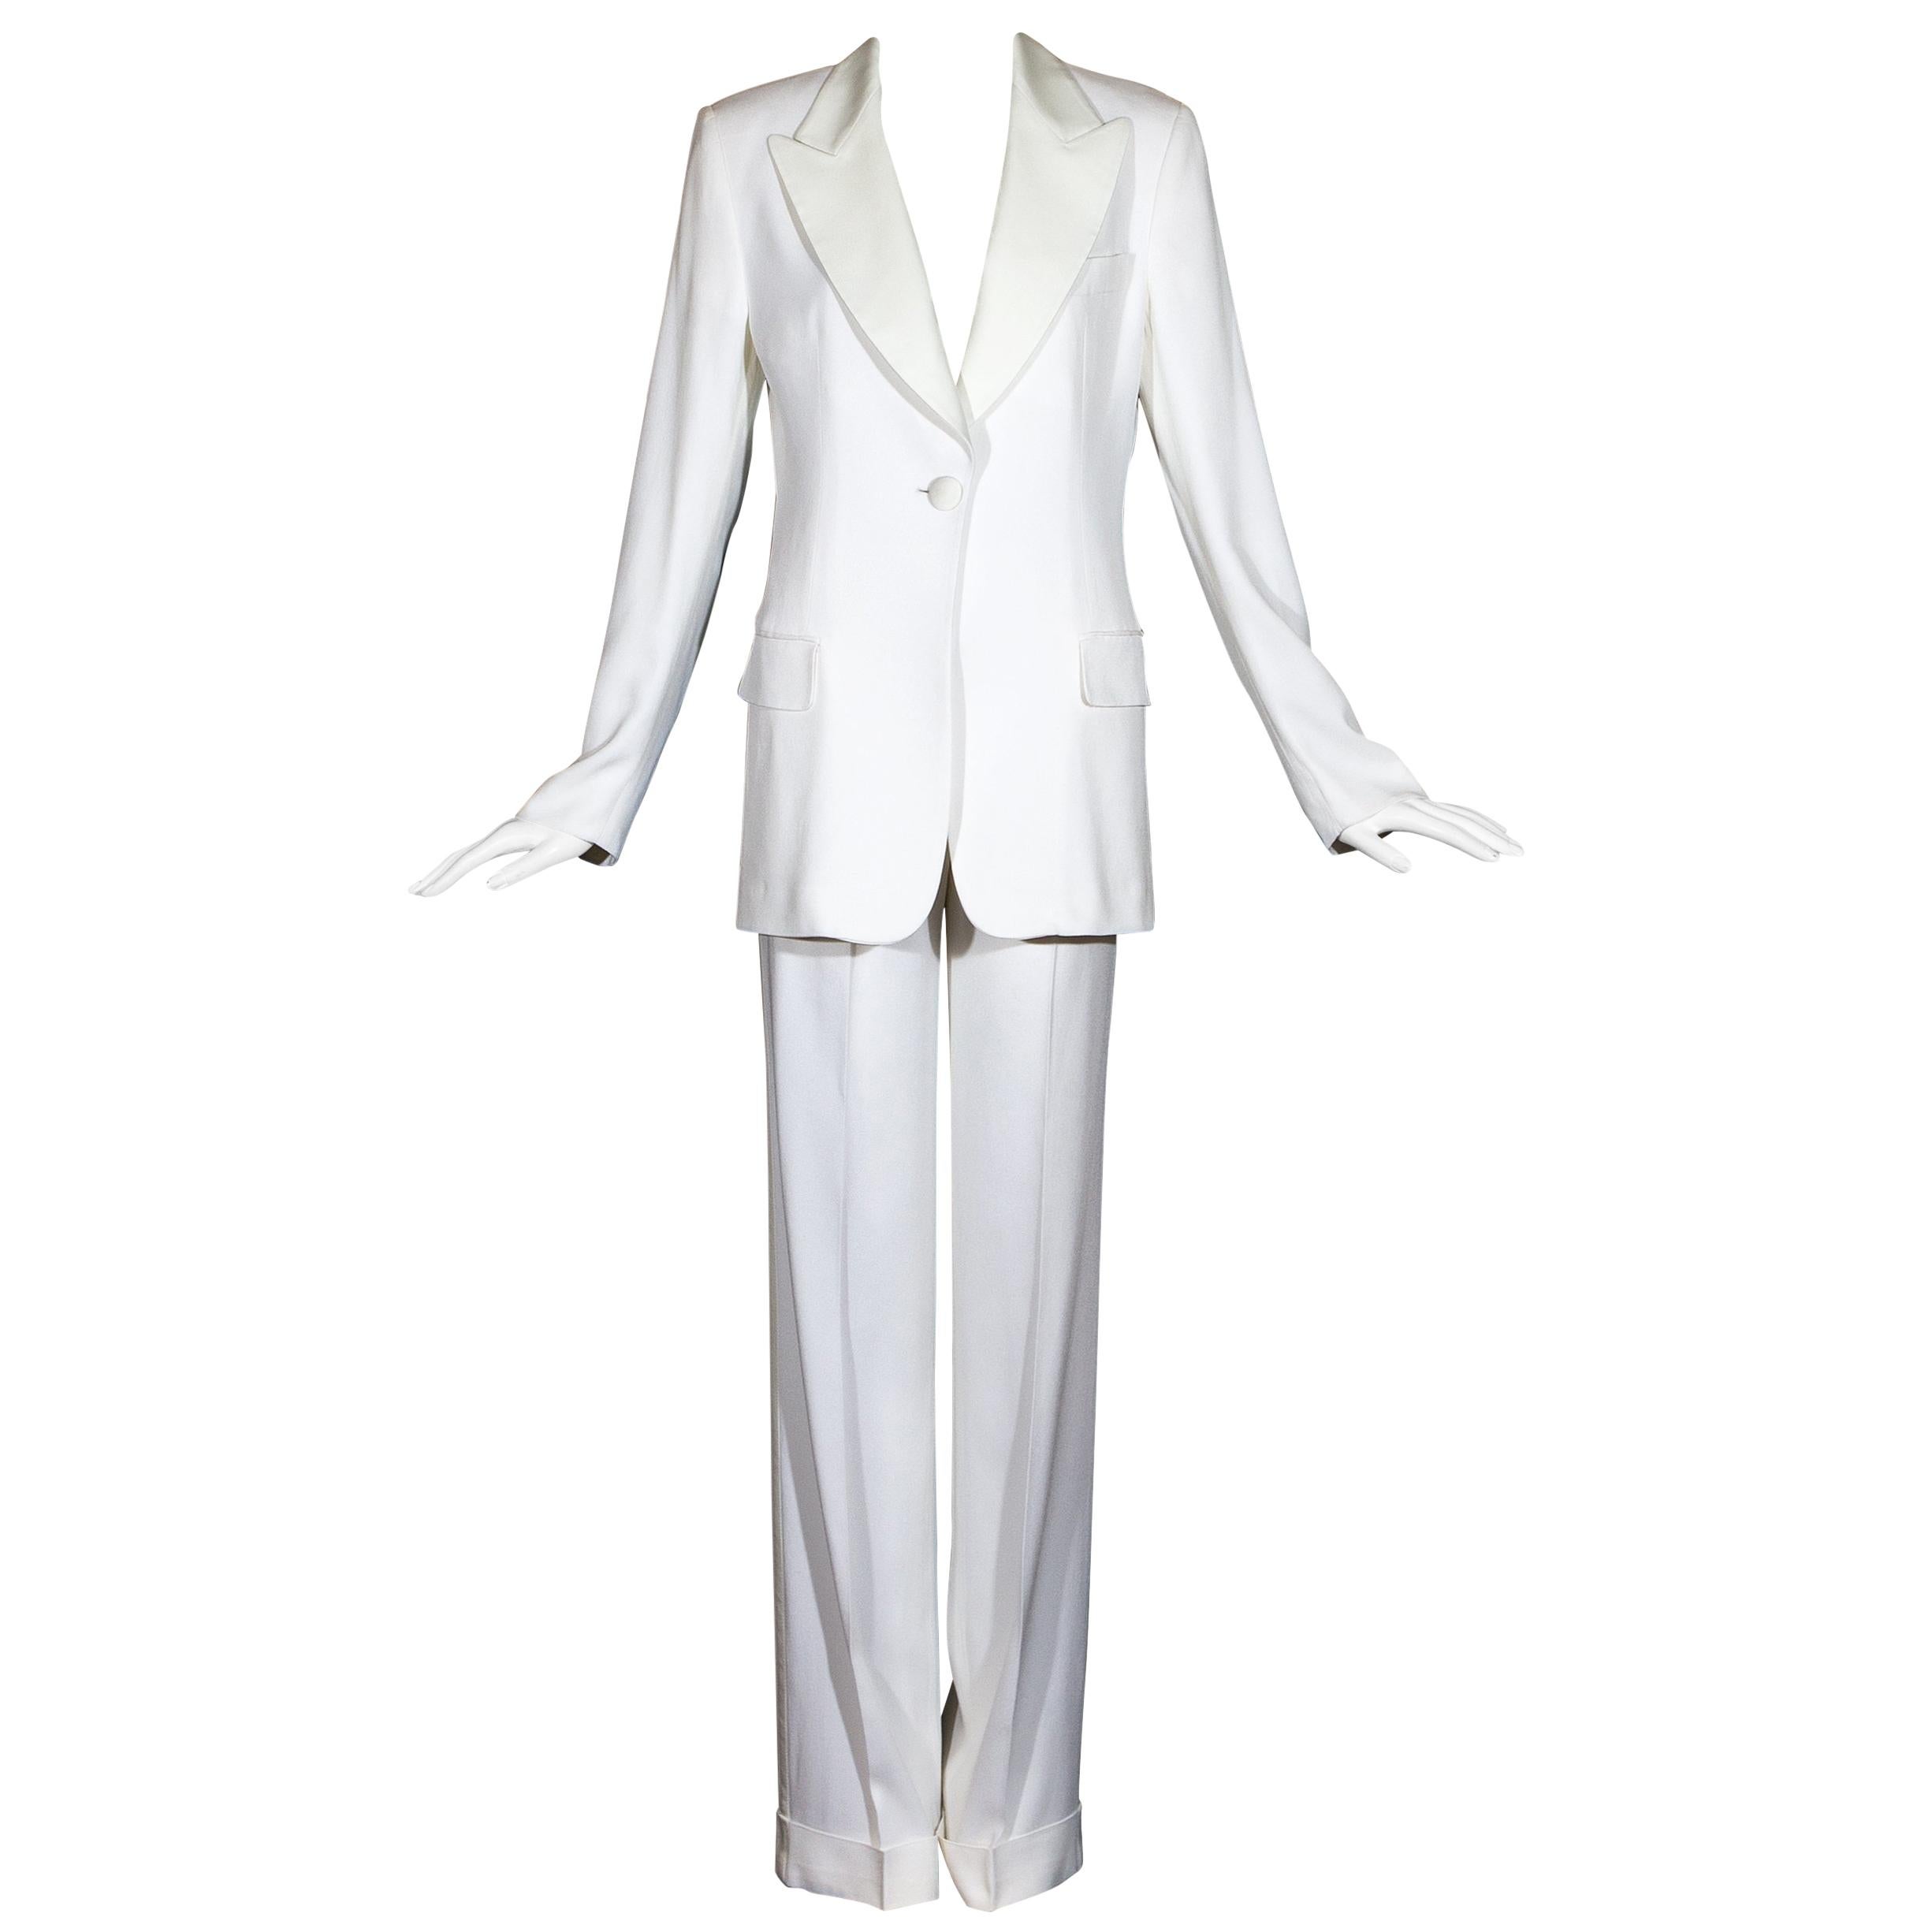 Dolce & Gabbana white crepe and satin Bianca Jagger pant suit, ss 1995